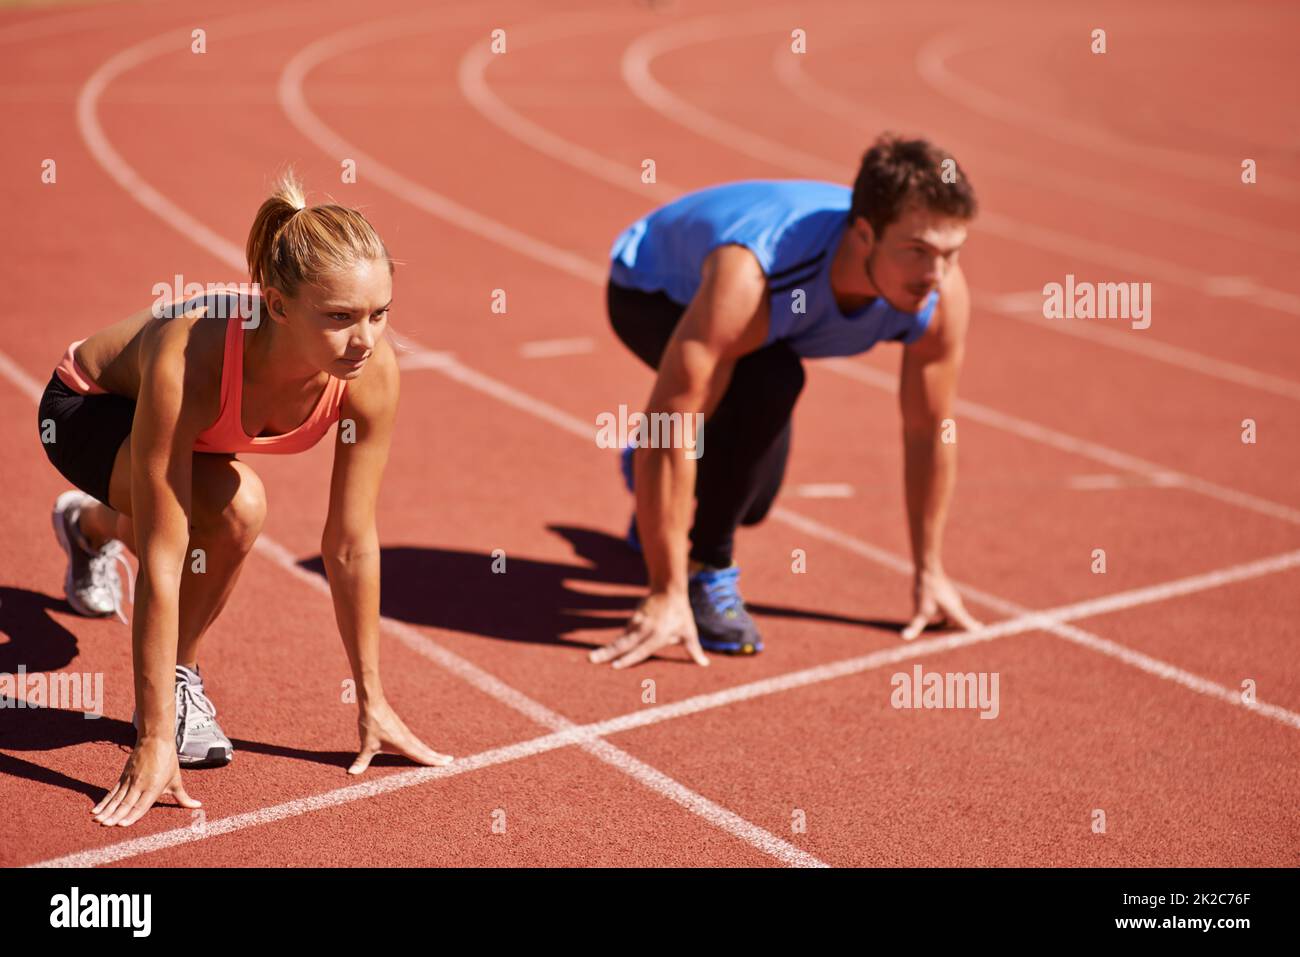 Ill take you on. Shot of two young people getting ready to race on an athletics track. Stock Photo